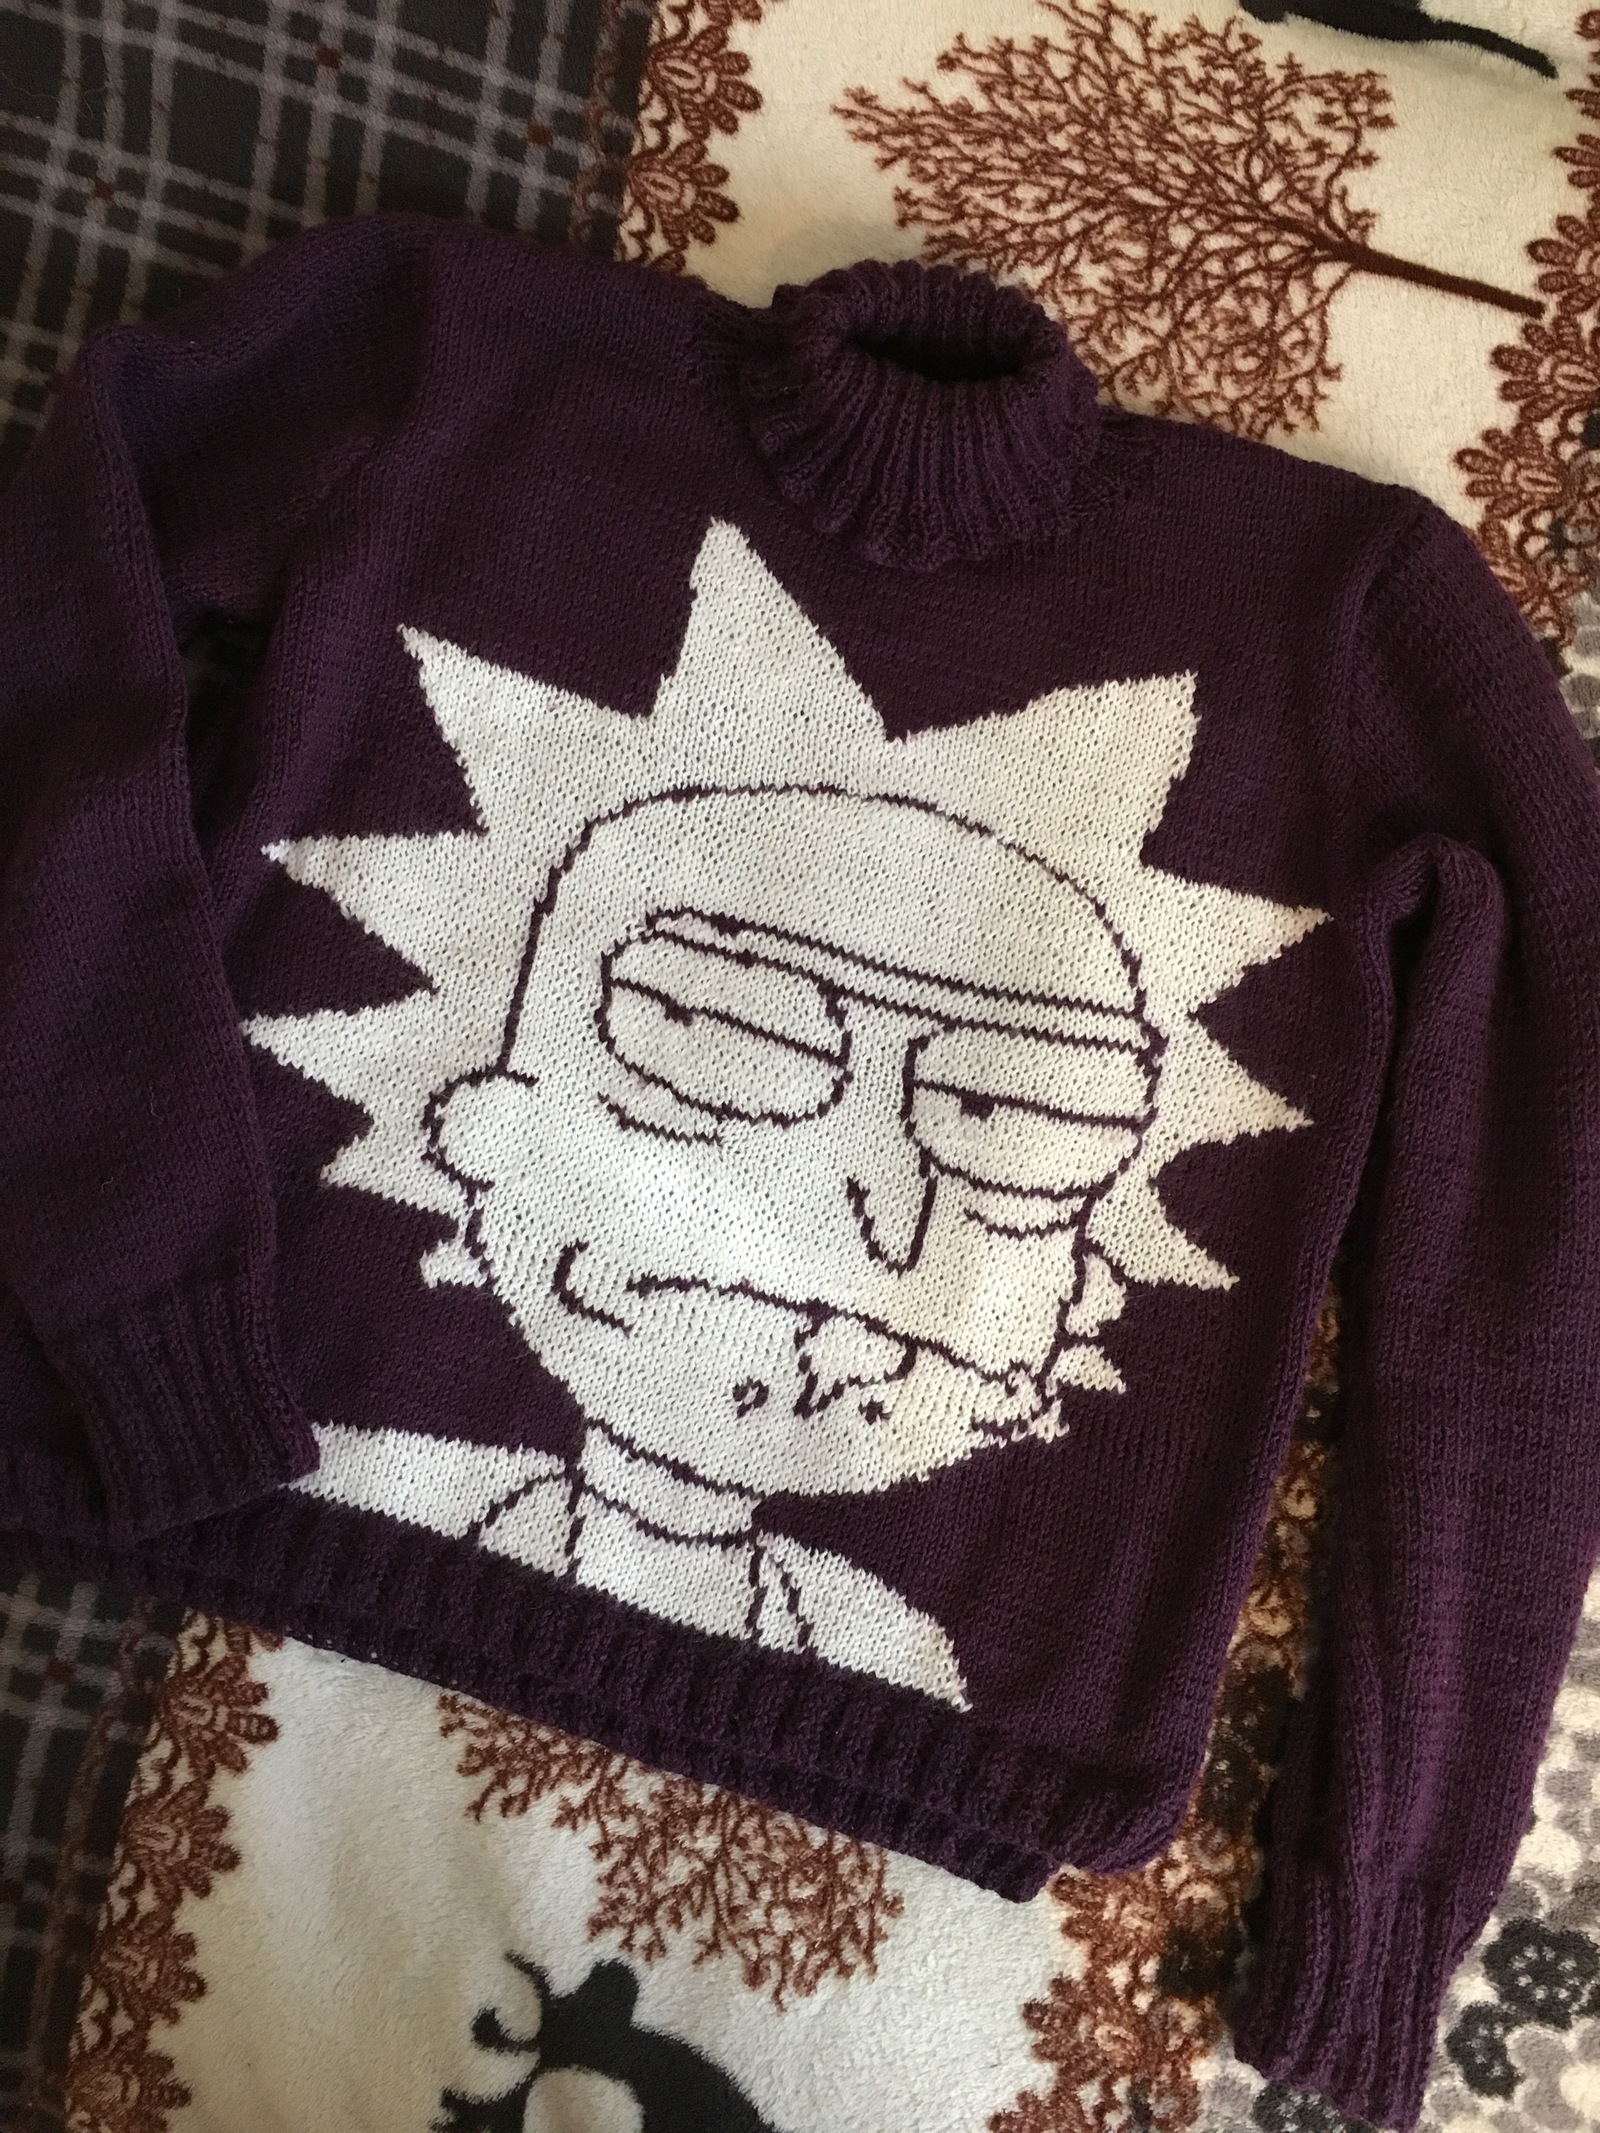 I turned myself into a sweater Morty - Hobby, Knitting a sweater, With your own hands, Knitting, Rick, Rick and Morty, My